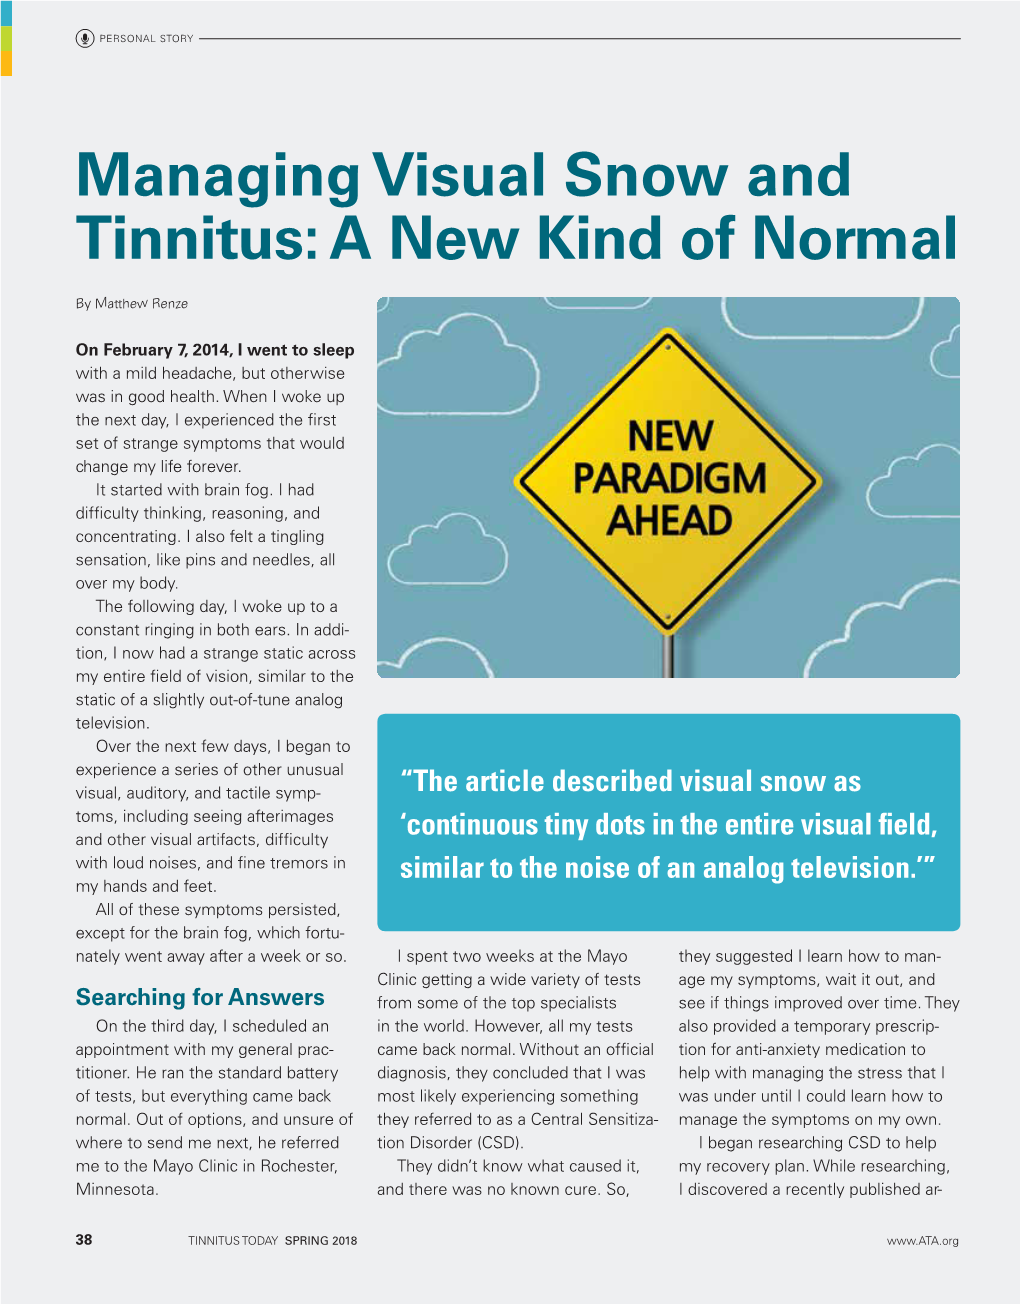 Managing Visual Snow and Tinnitus: a New Kind of Normal